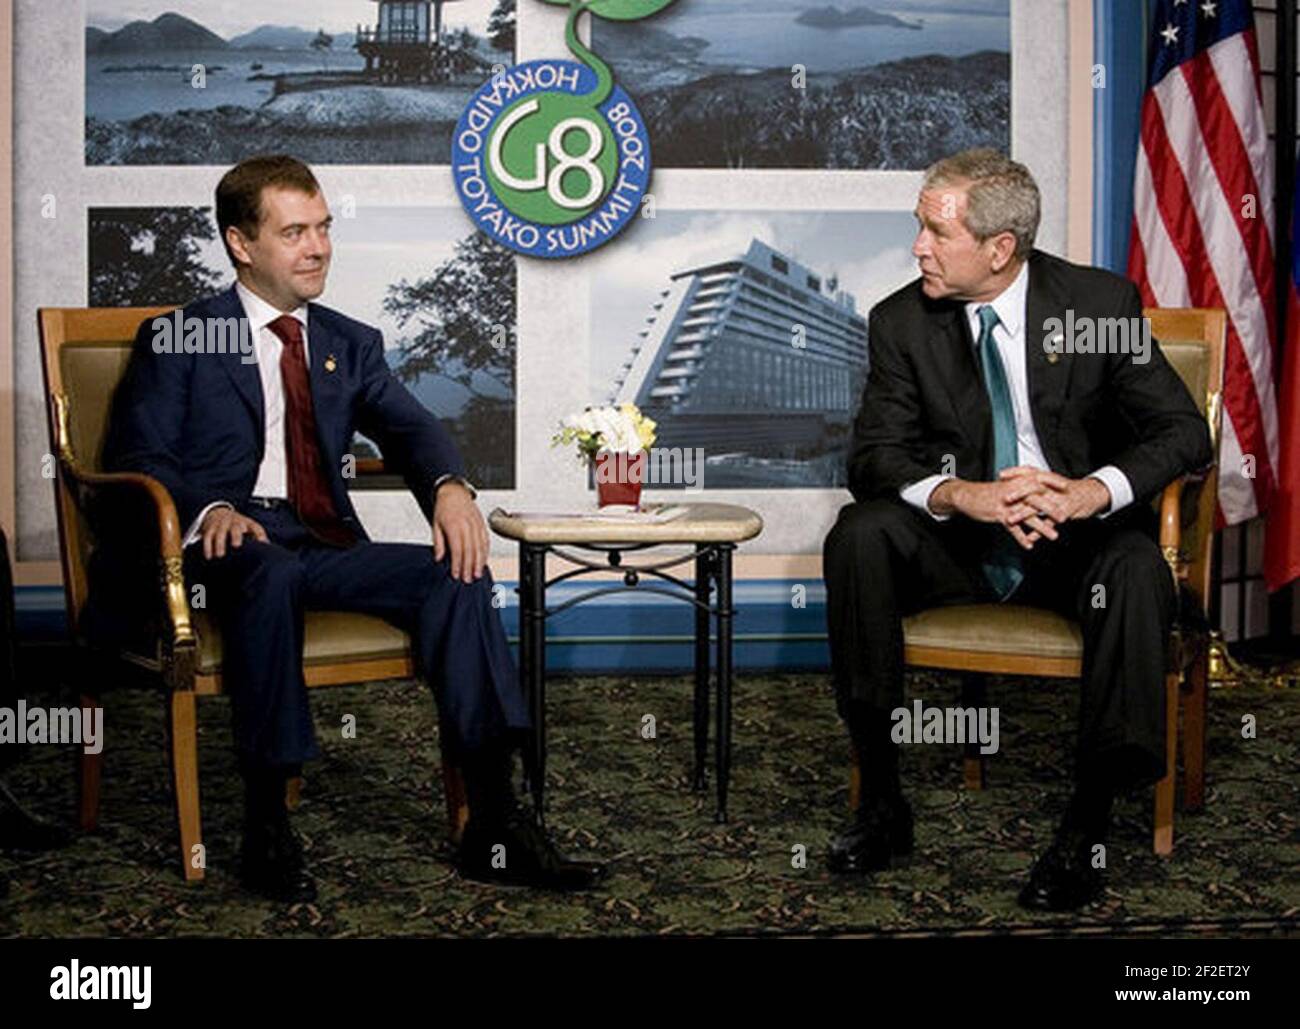 President Bush Meets with President Medvedev of Russia at G8 Summit. Stock Photo